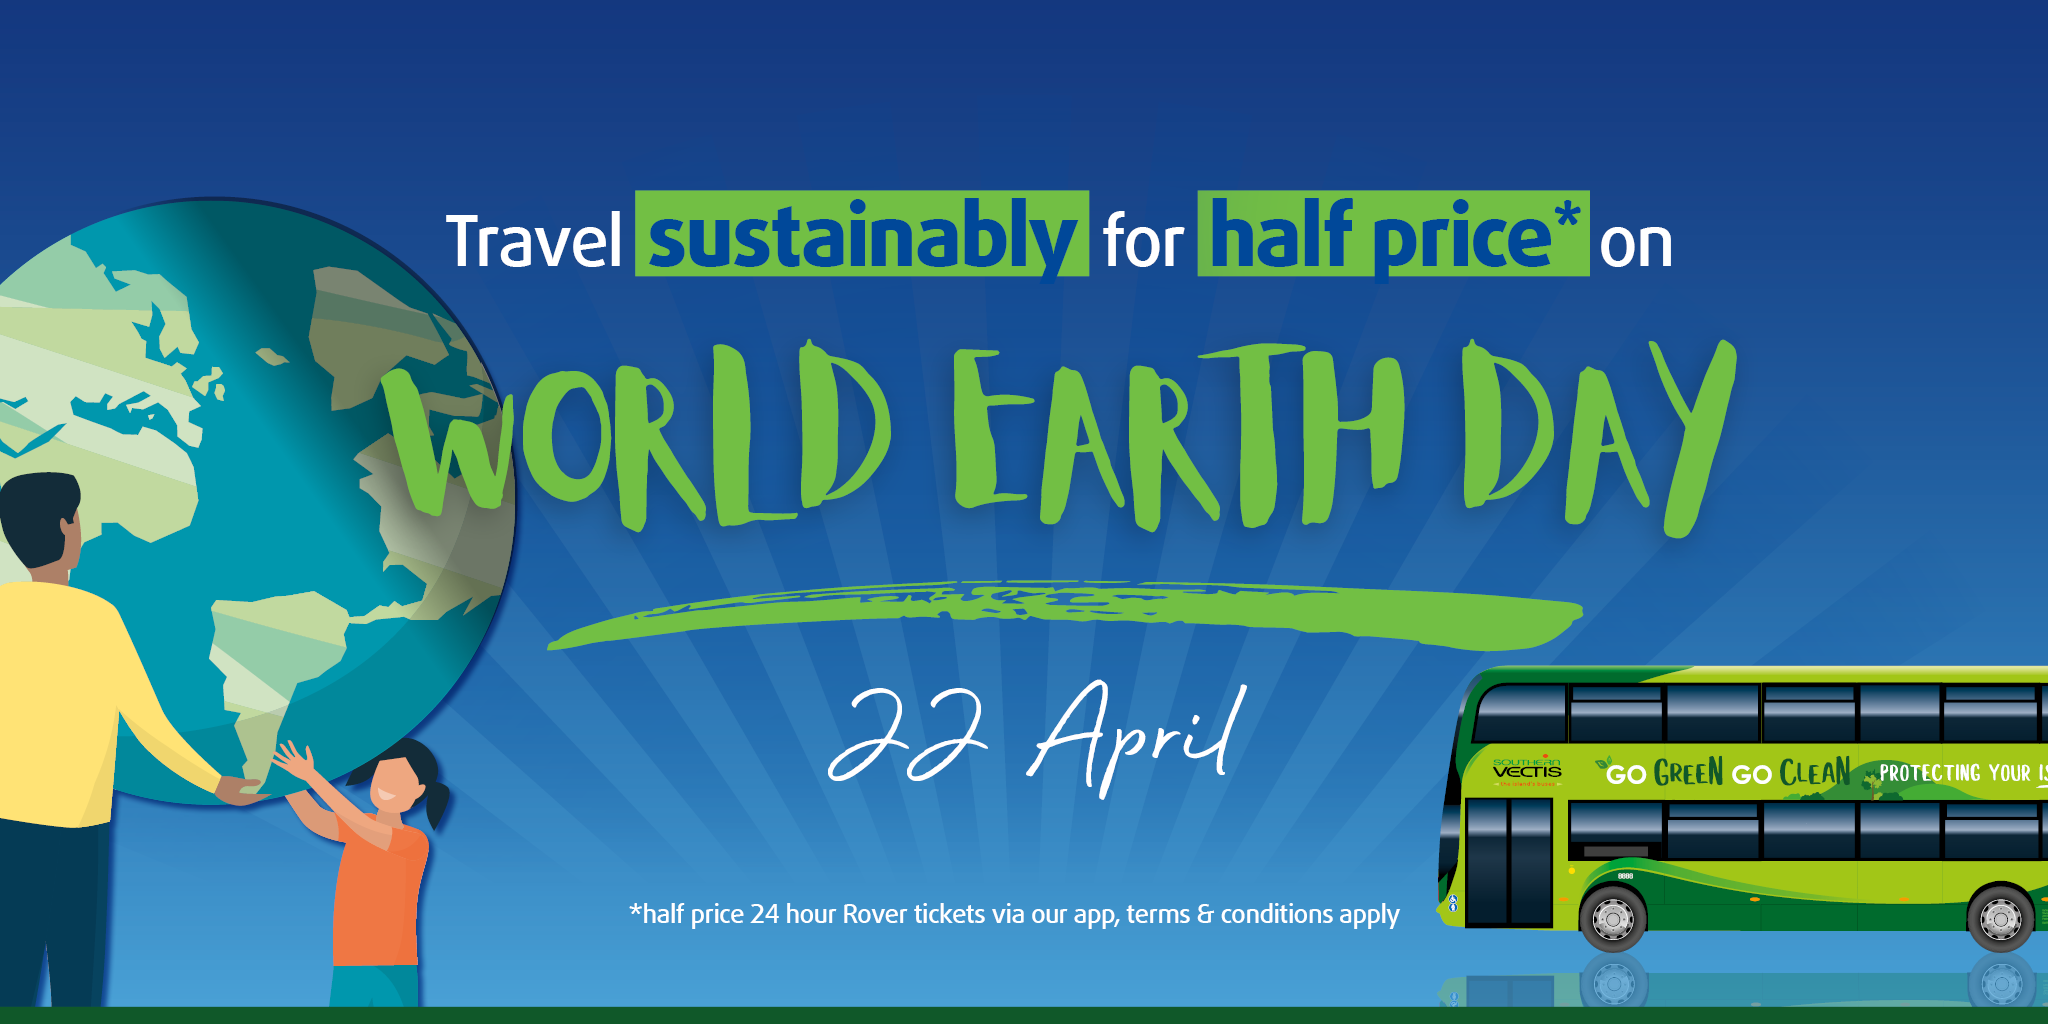 travel sustainably for half price on world earth day 22 april